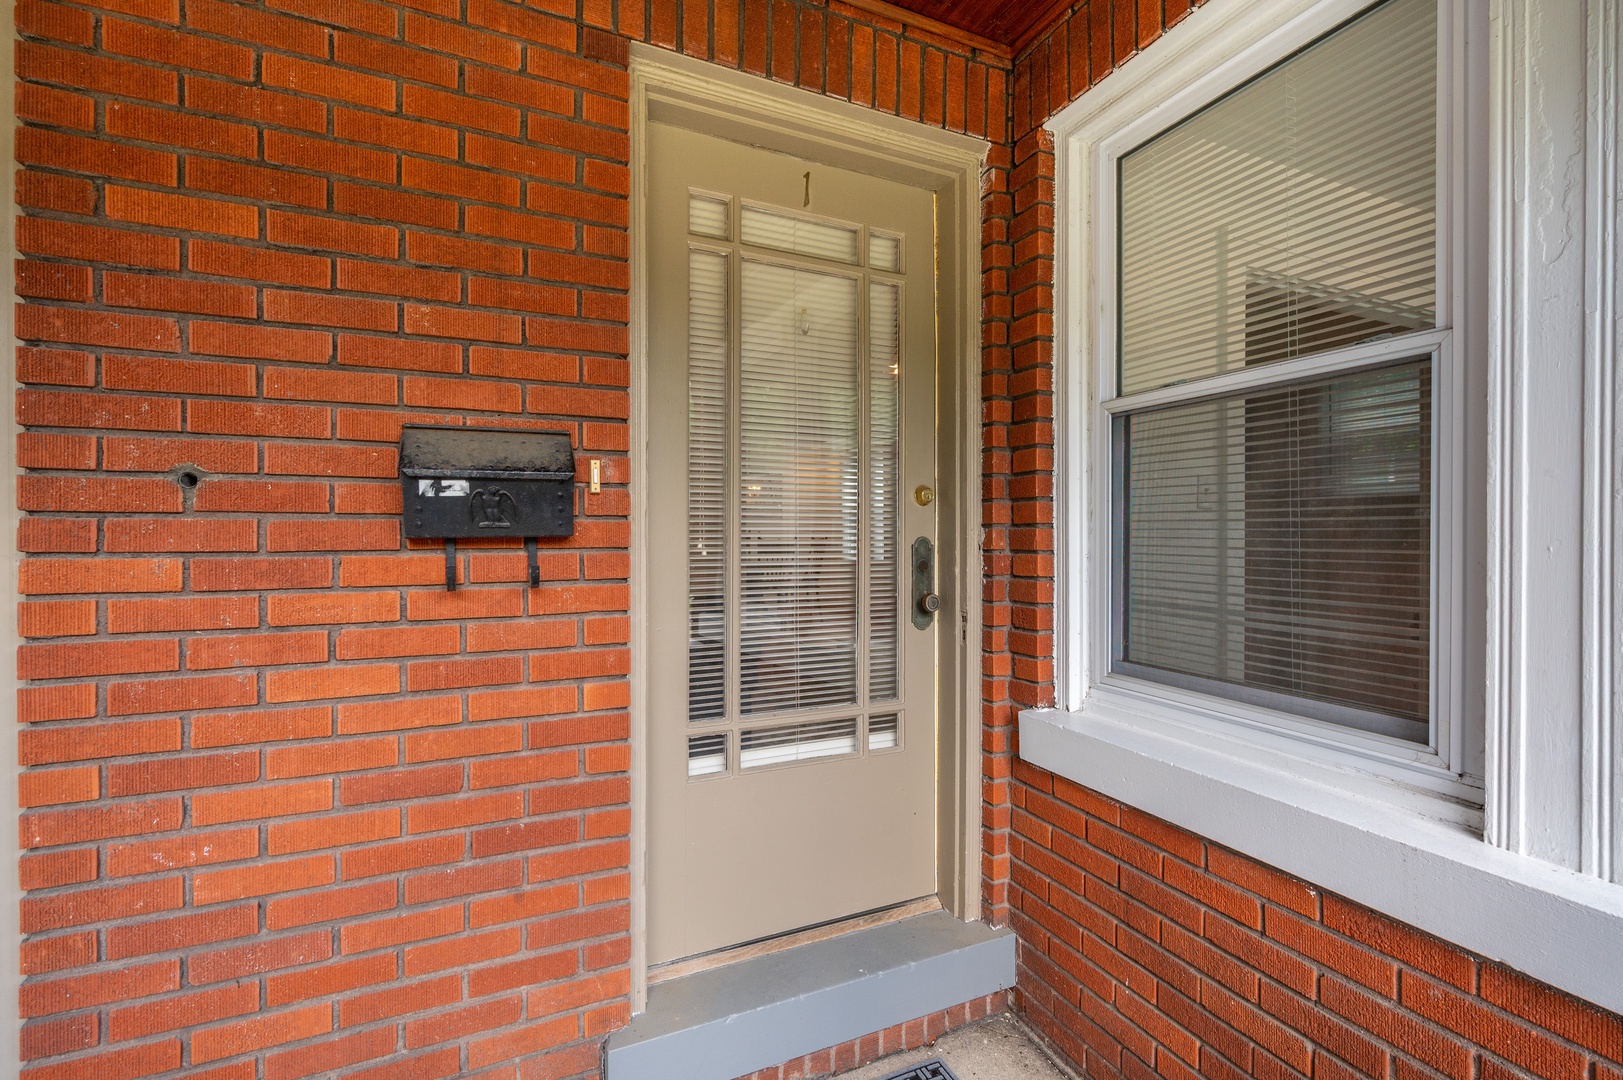 Unit 1 – This main-level condo is equipped with Keyless Entry